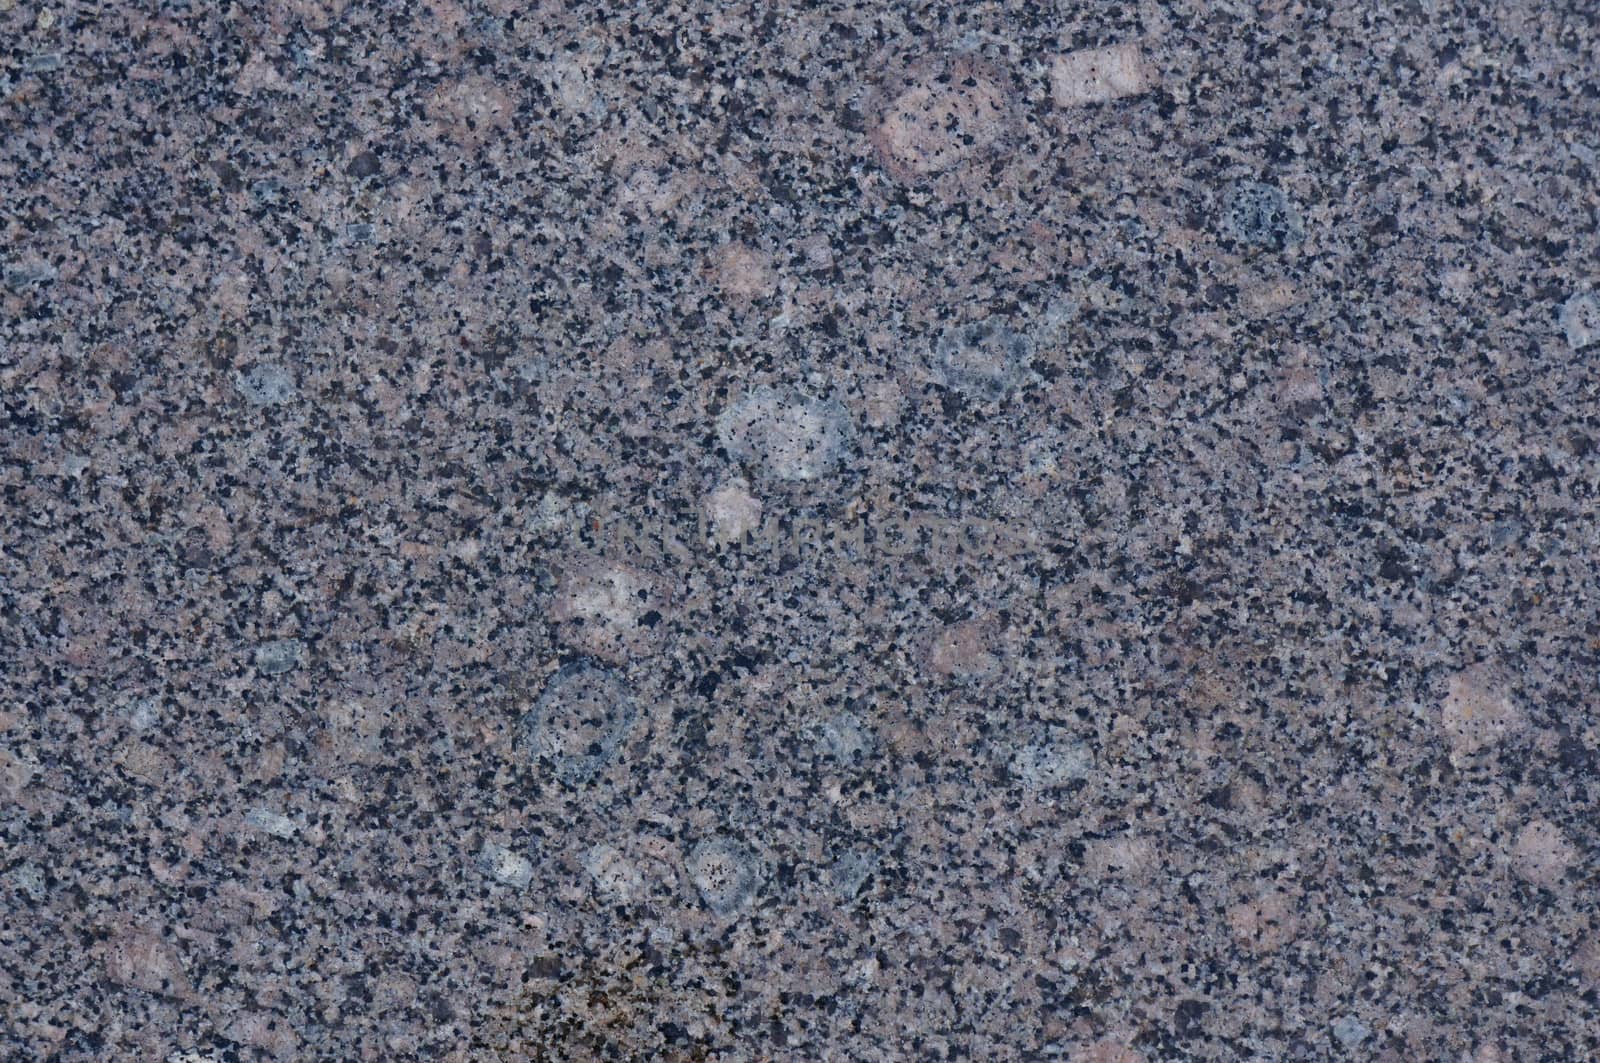 The surface of polished granite